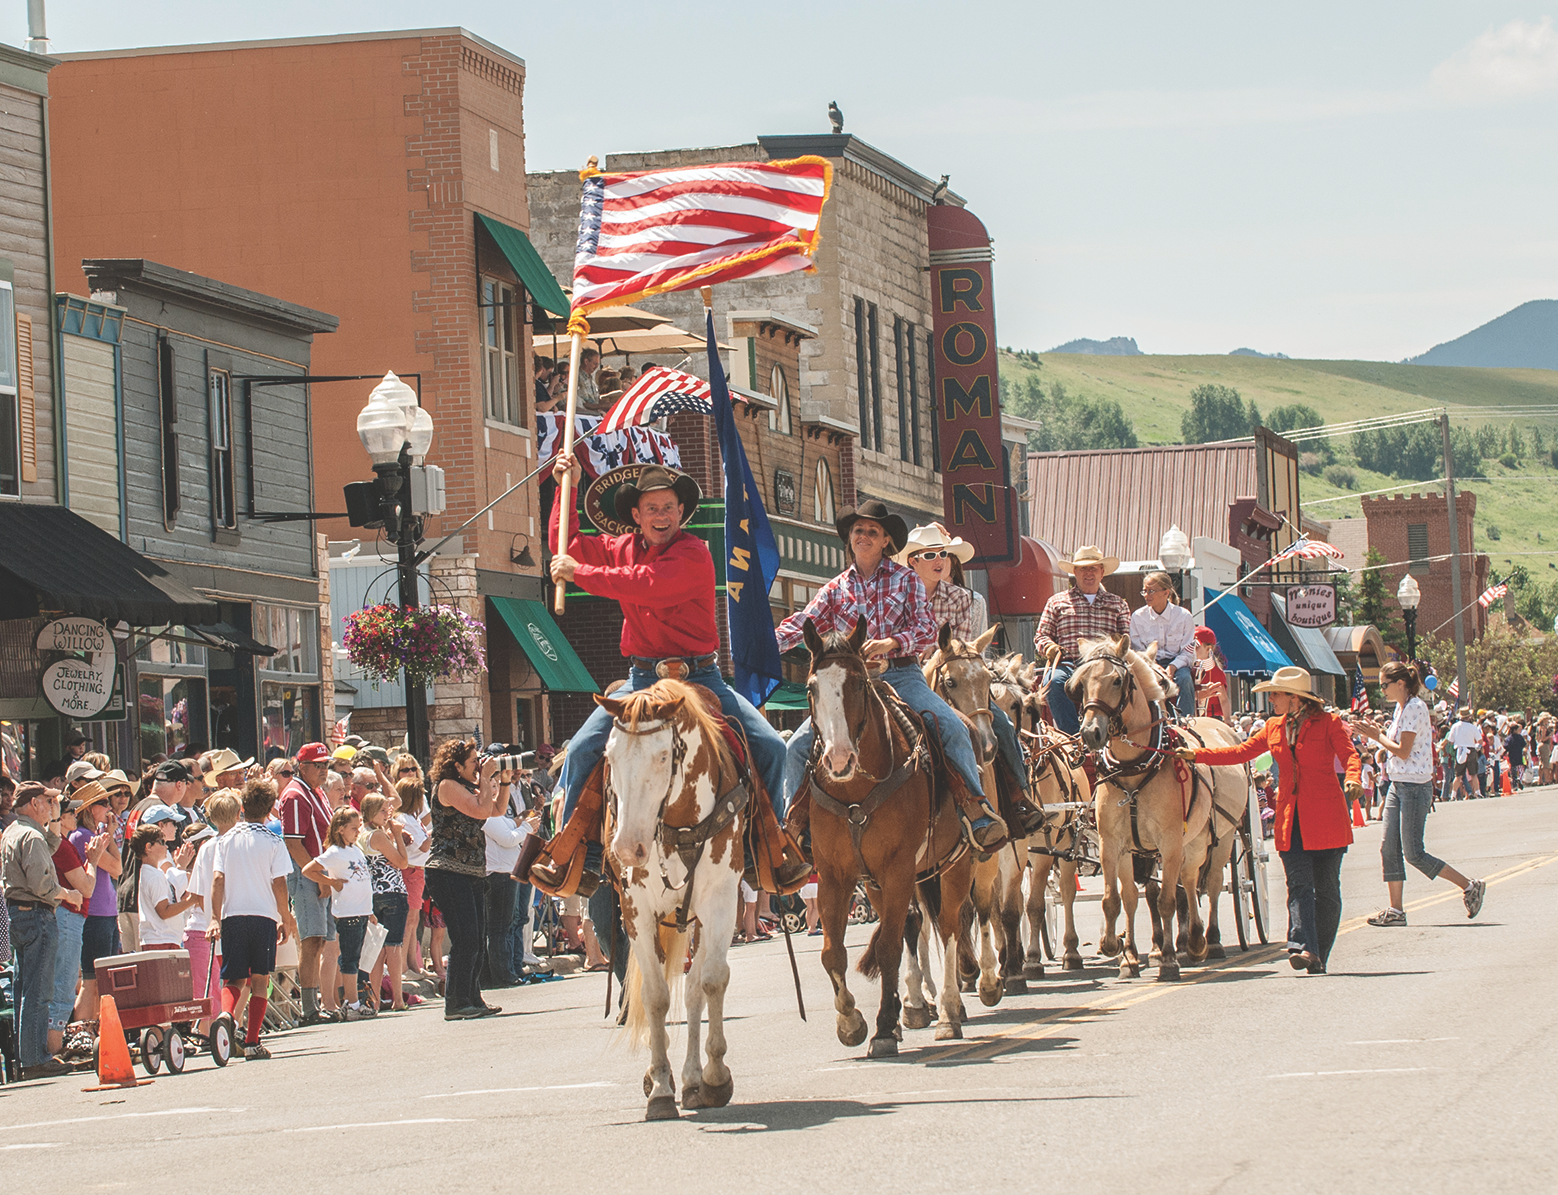 https://truewestmagazine.com/wp-content/uploads/2022/05/Red-Lodge-Rodeo-Parade_scaled.png